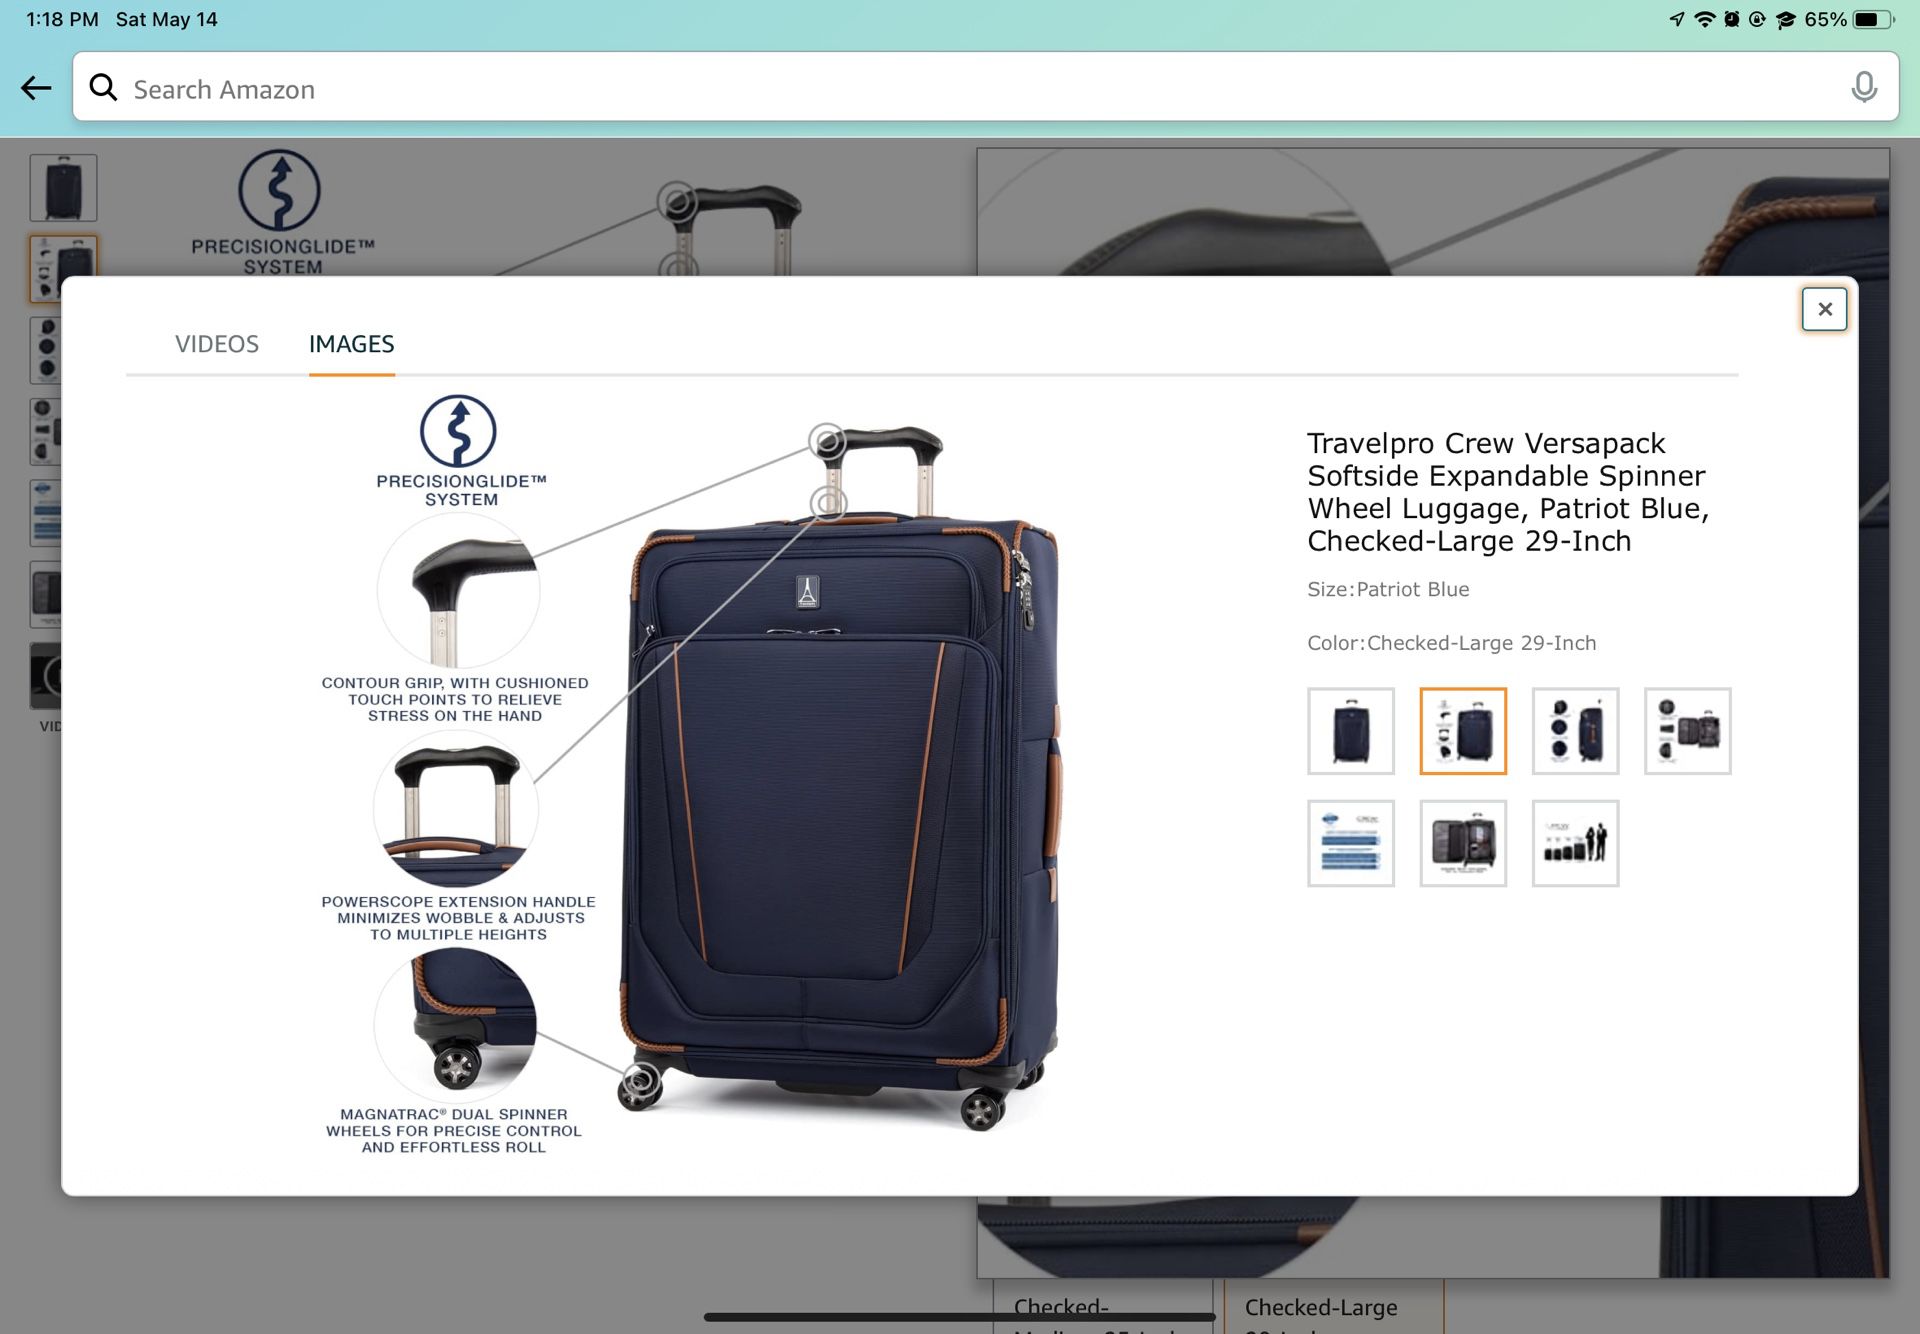 NEW: Checked-Large 29 Inch Luggage